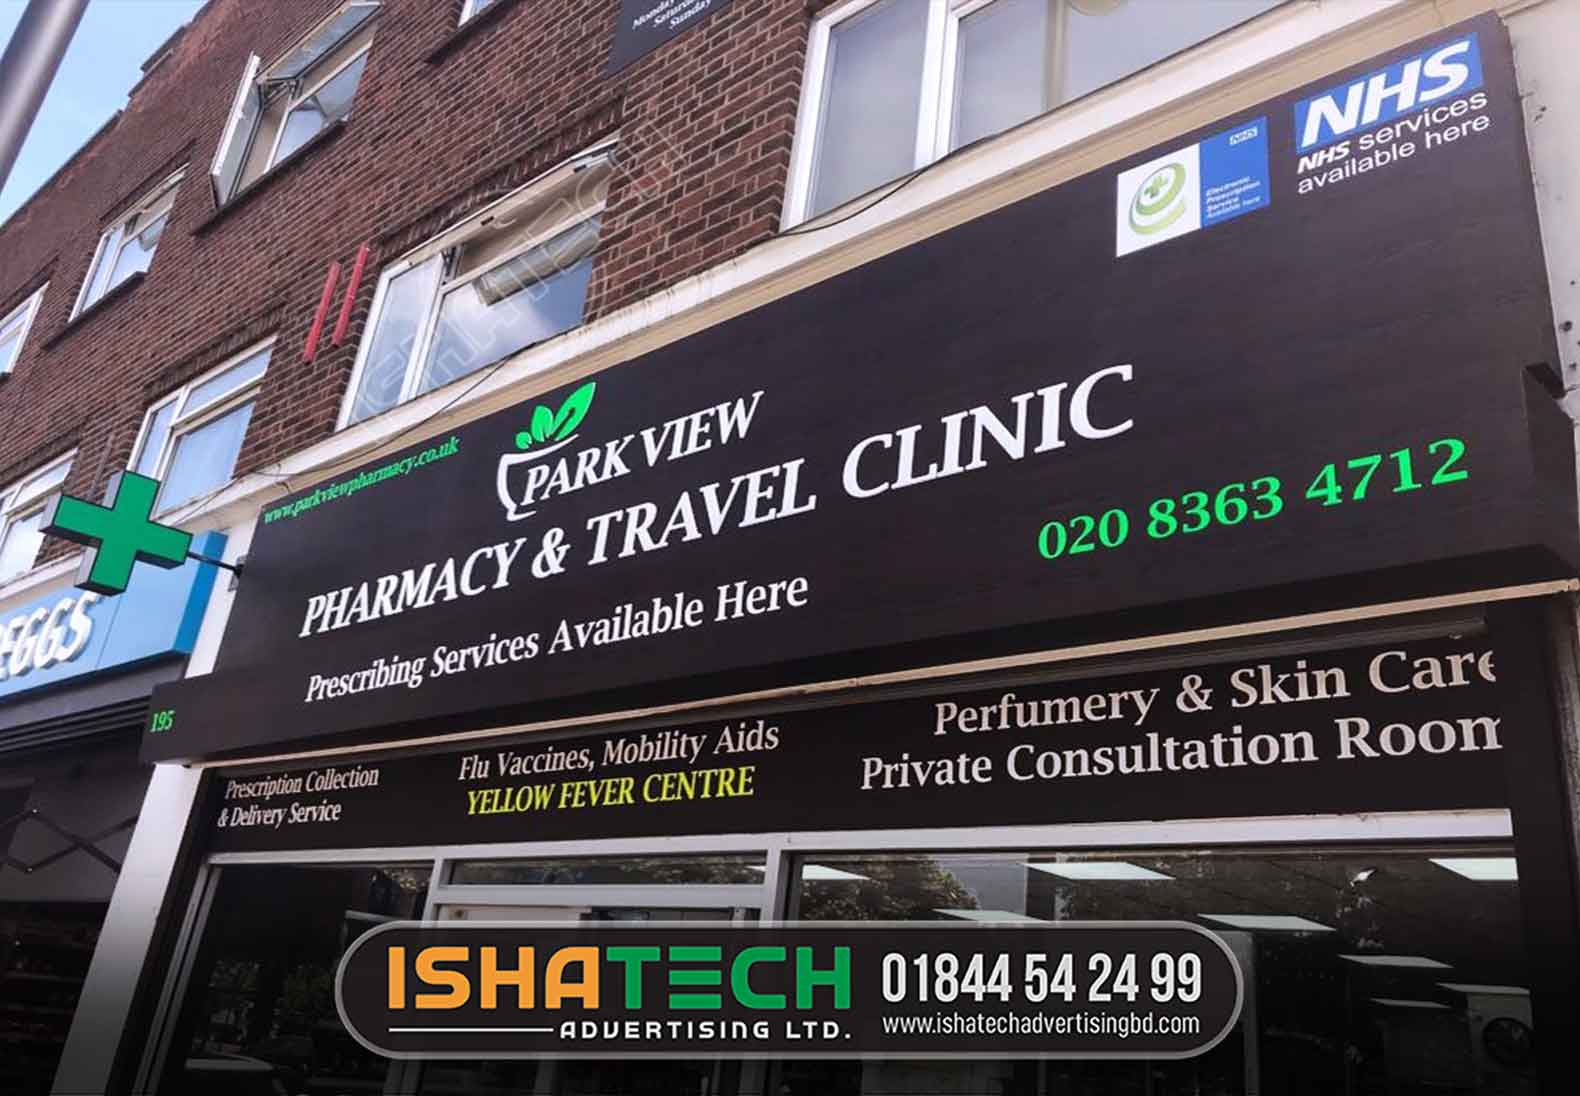 PARK VIEW PHARMACY AND TRAVEL CLINIC PVC/ACP PROFILE BOX IN DHAKA, BANGLADESH. BEST LED SIGNBOARD MAKING IN BD